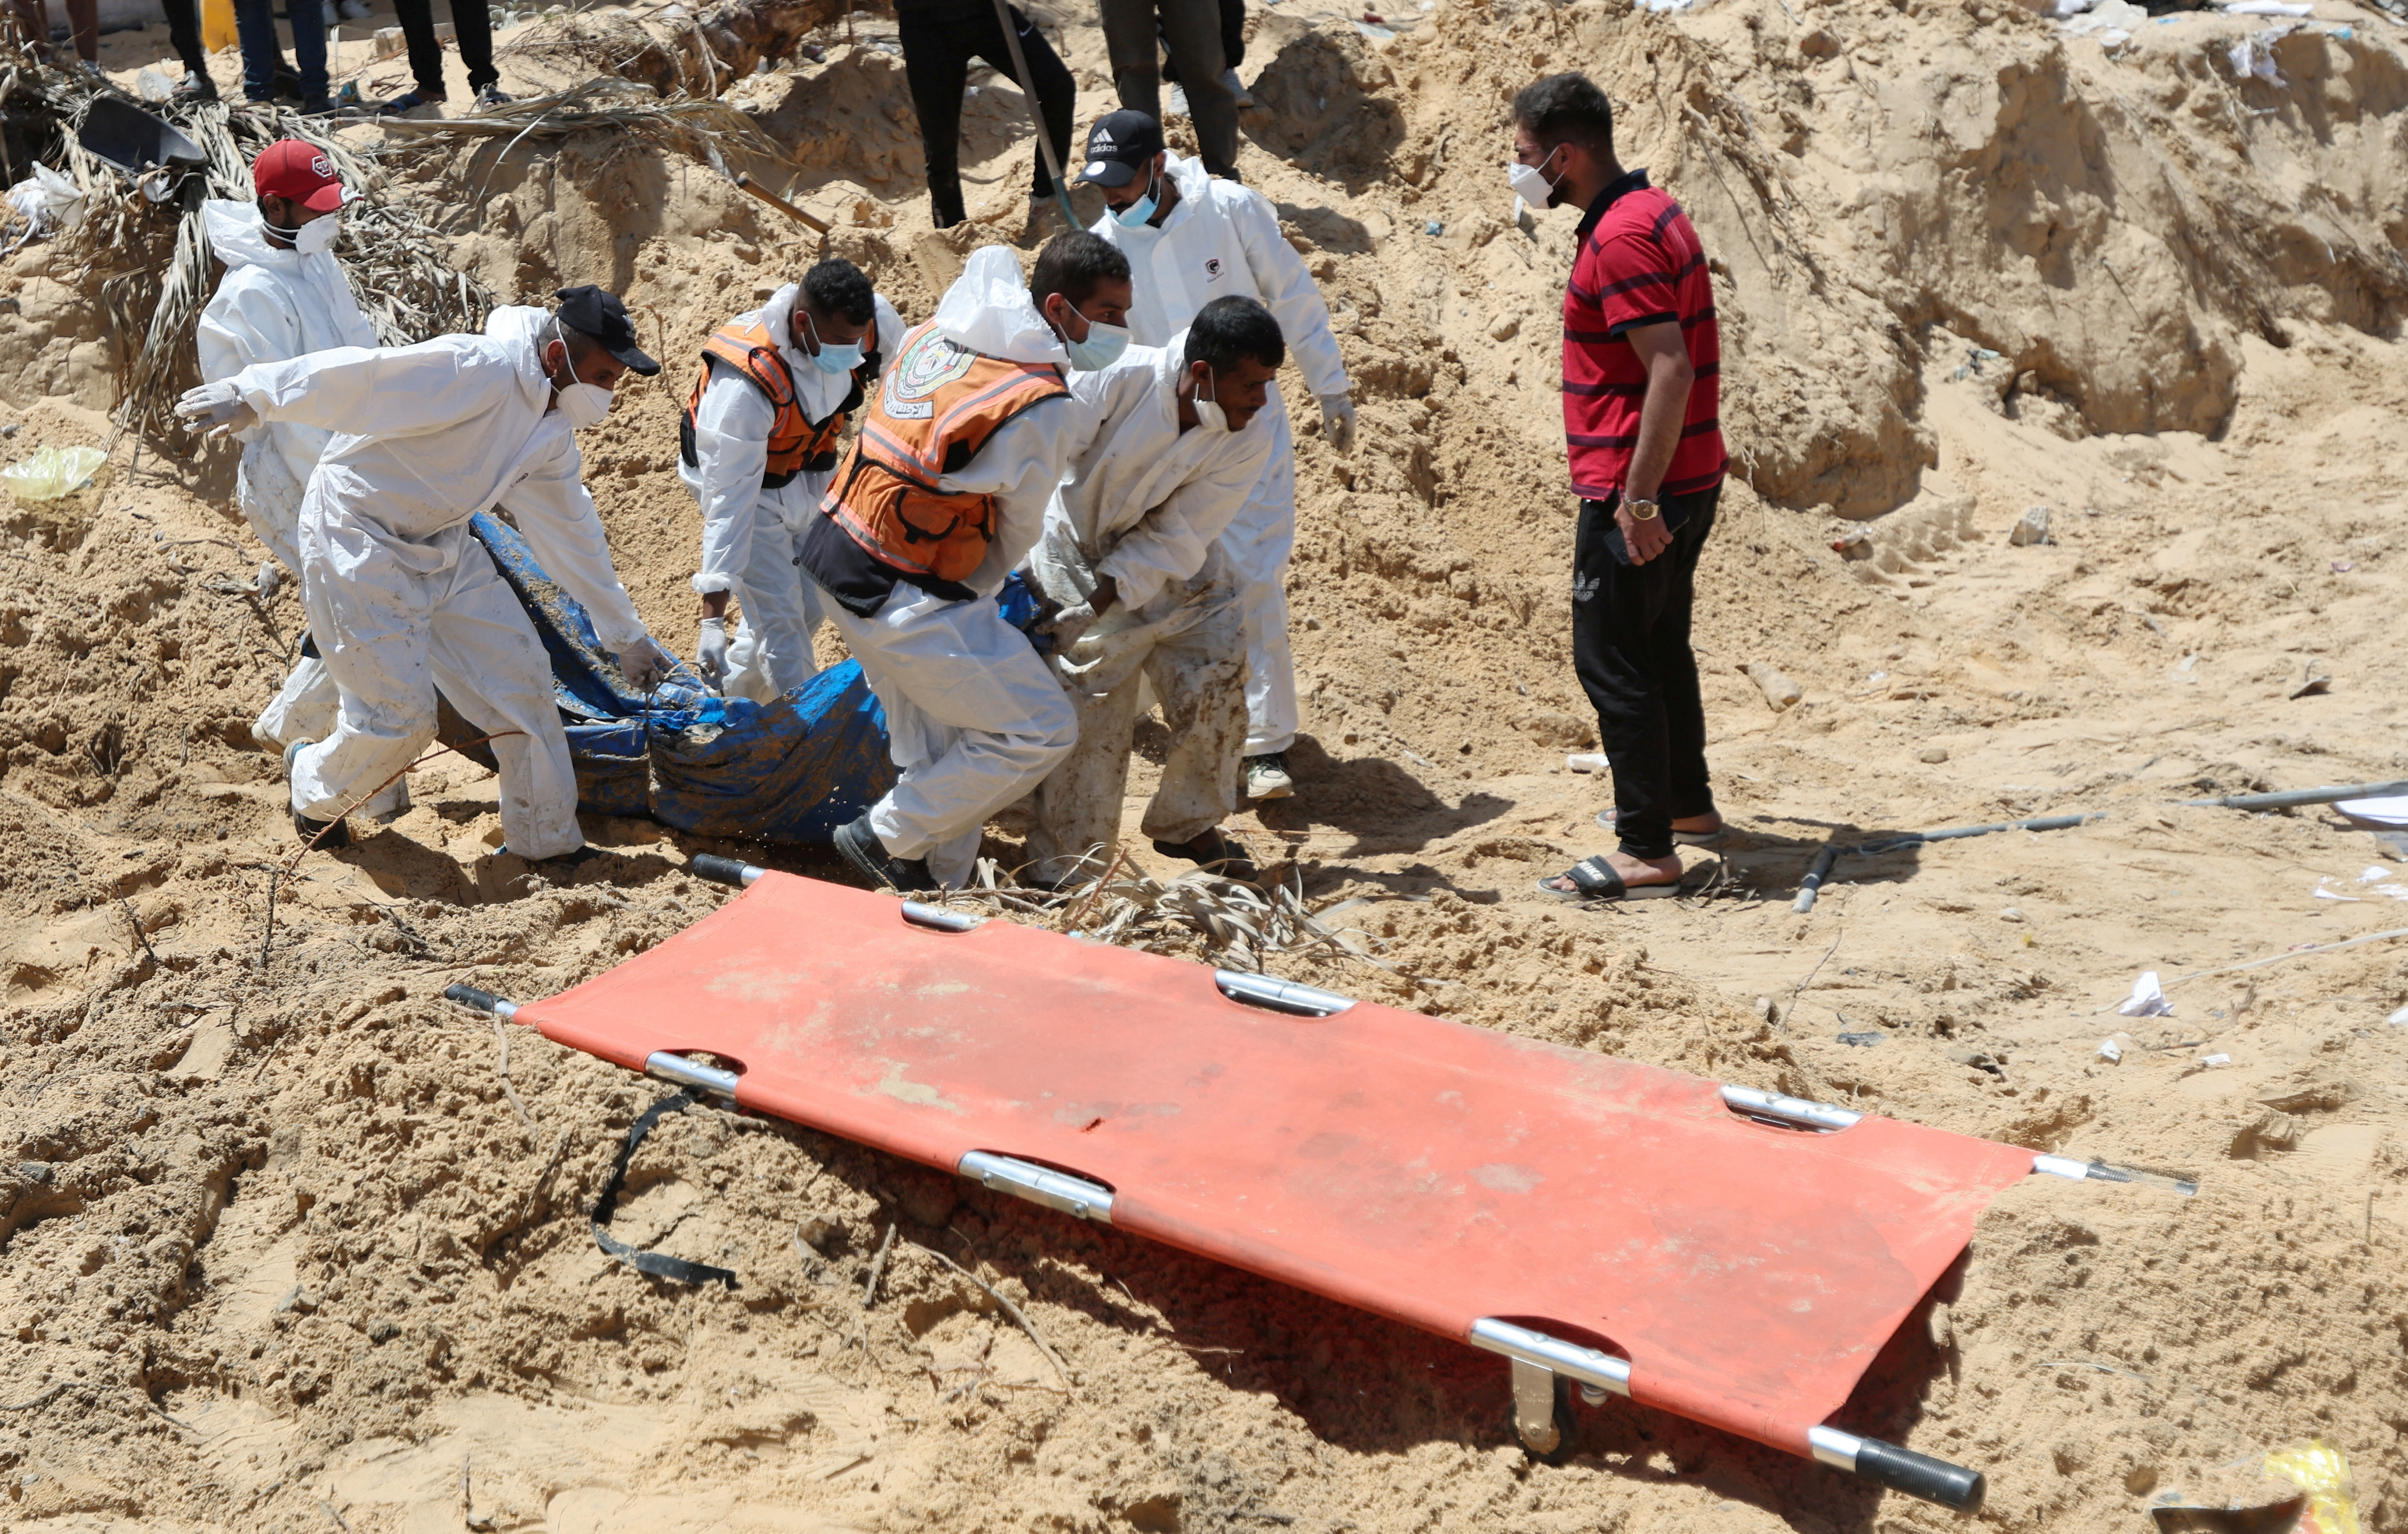 People work to move into a cemetery bodies of Palestinians killed during Israel's military offensive and buried at Nasser hospital, in Khan Younis